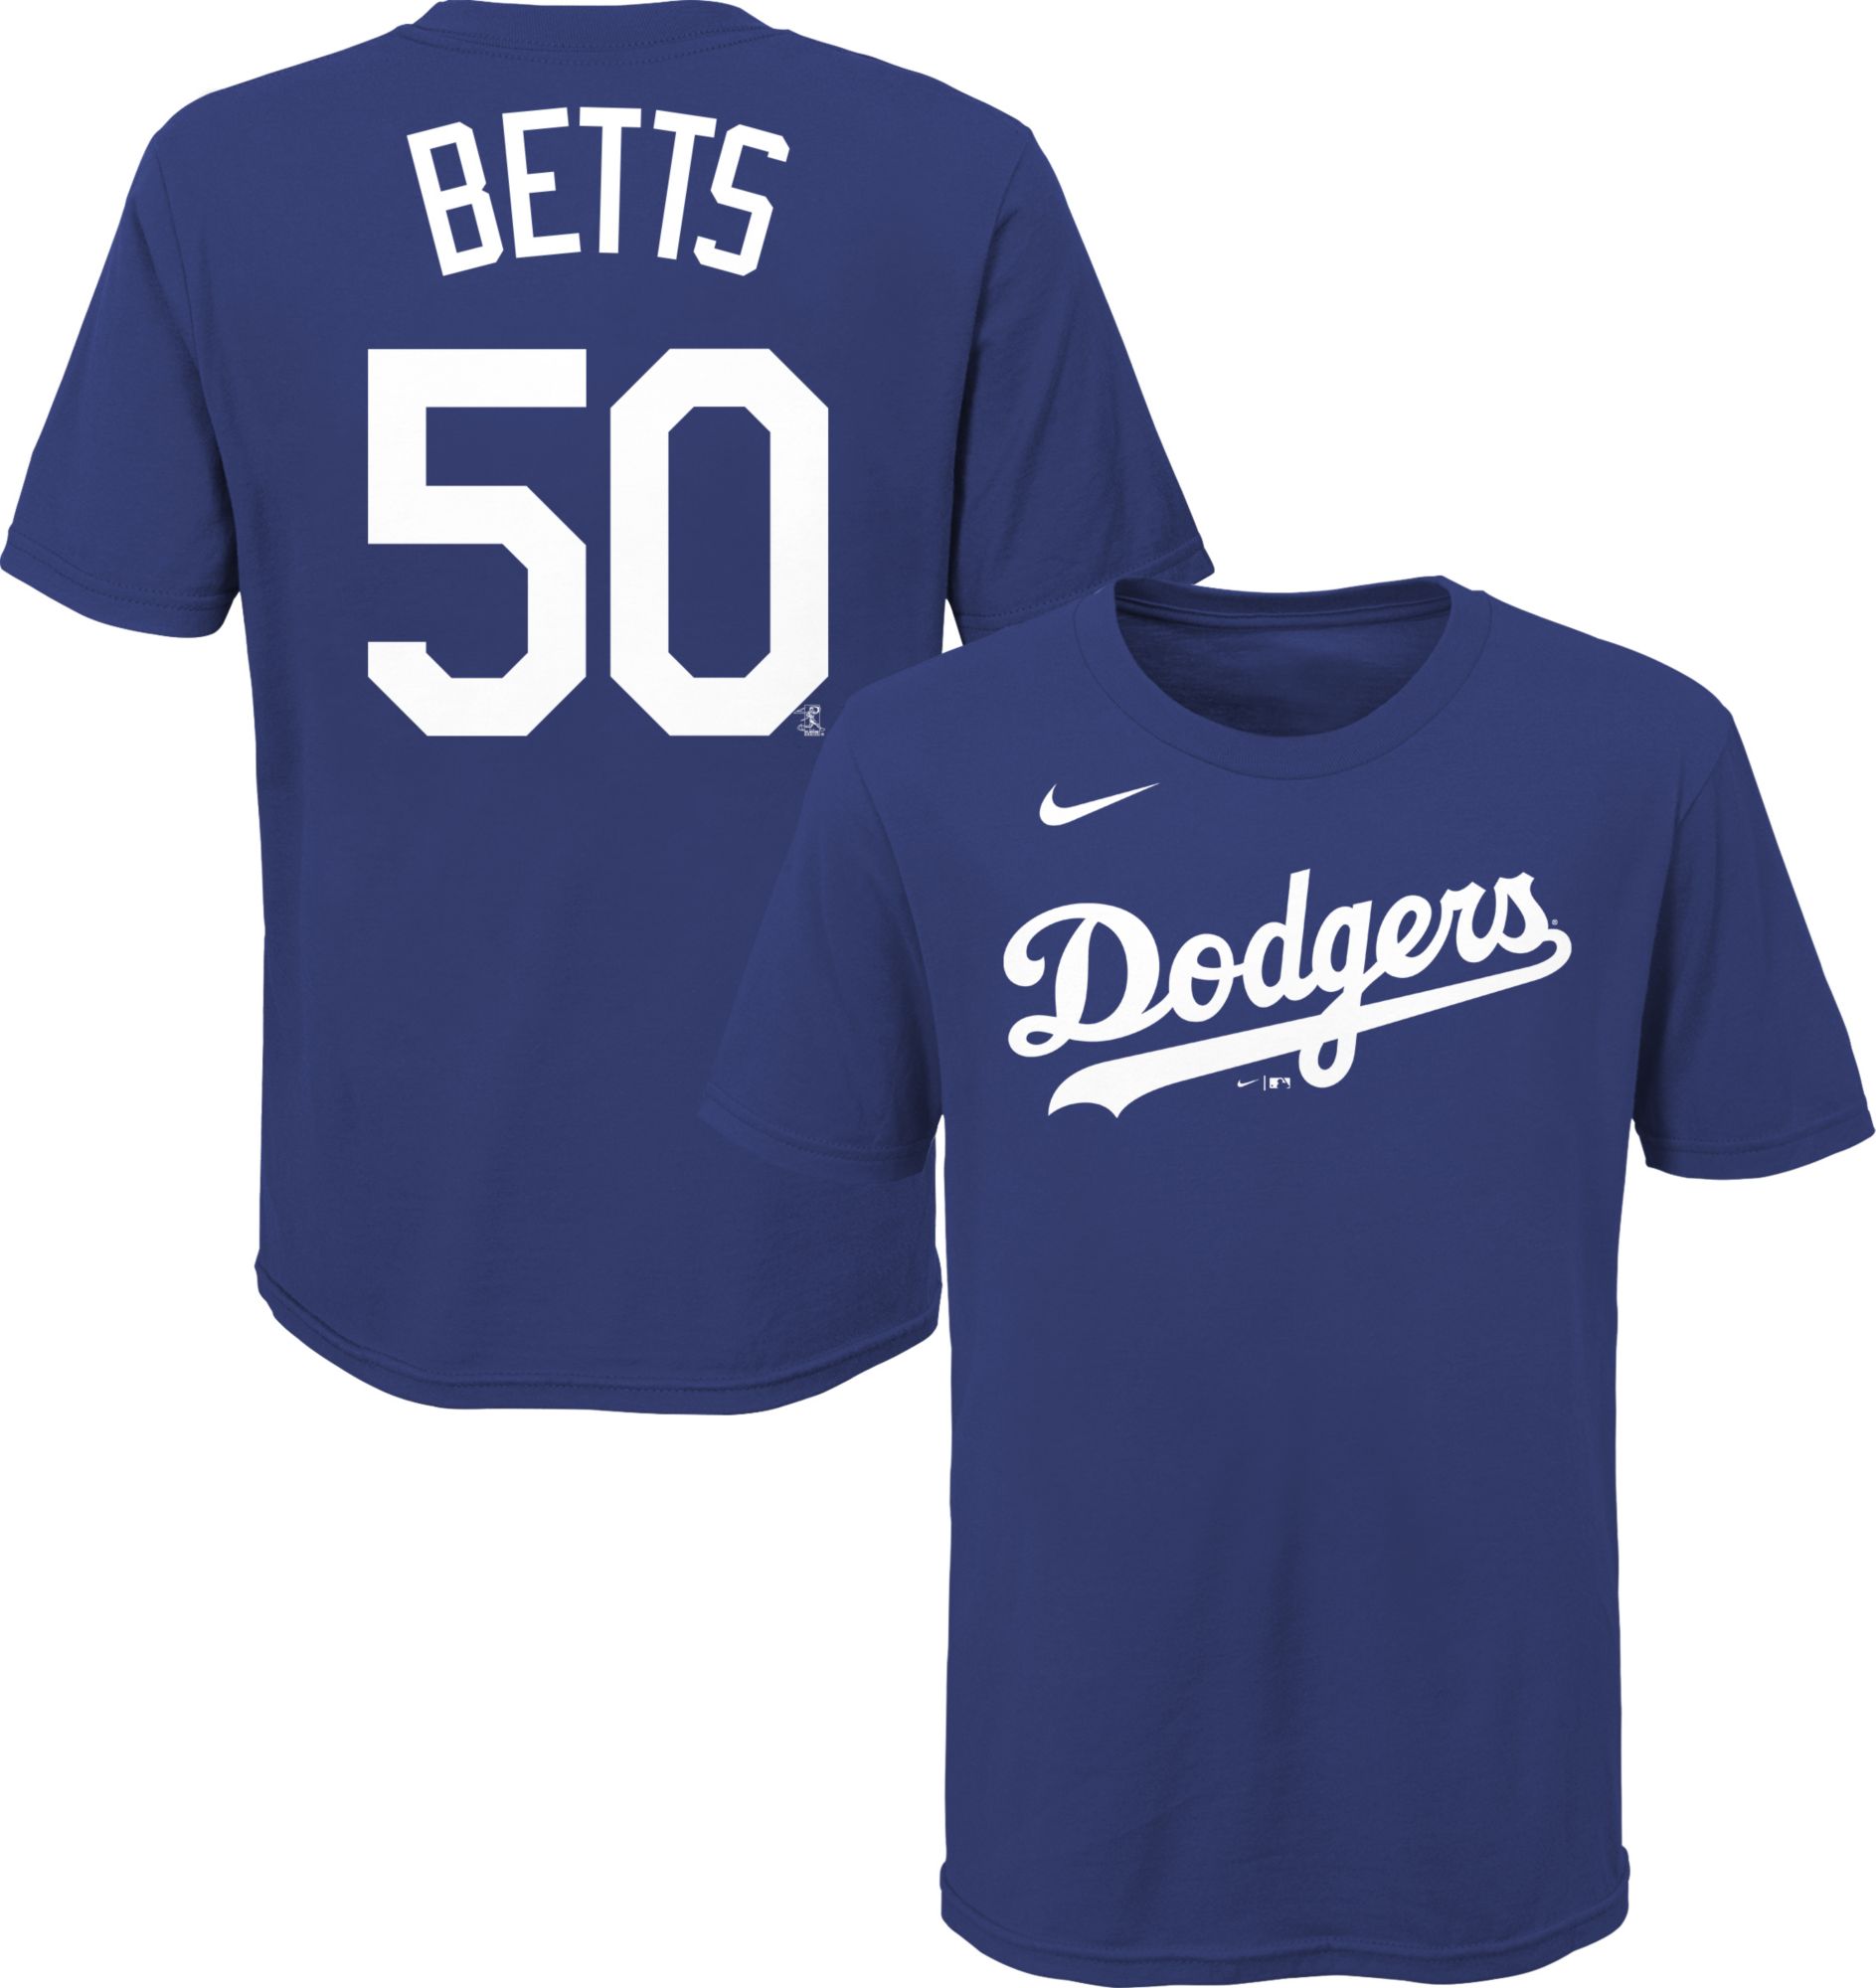 New Mookie Betts Dodgers Nike Gray Road Jersey Size Youth Large 14-16